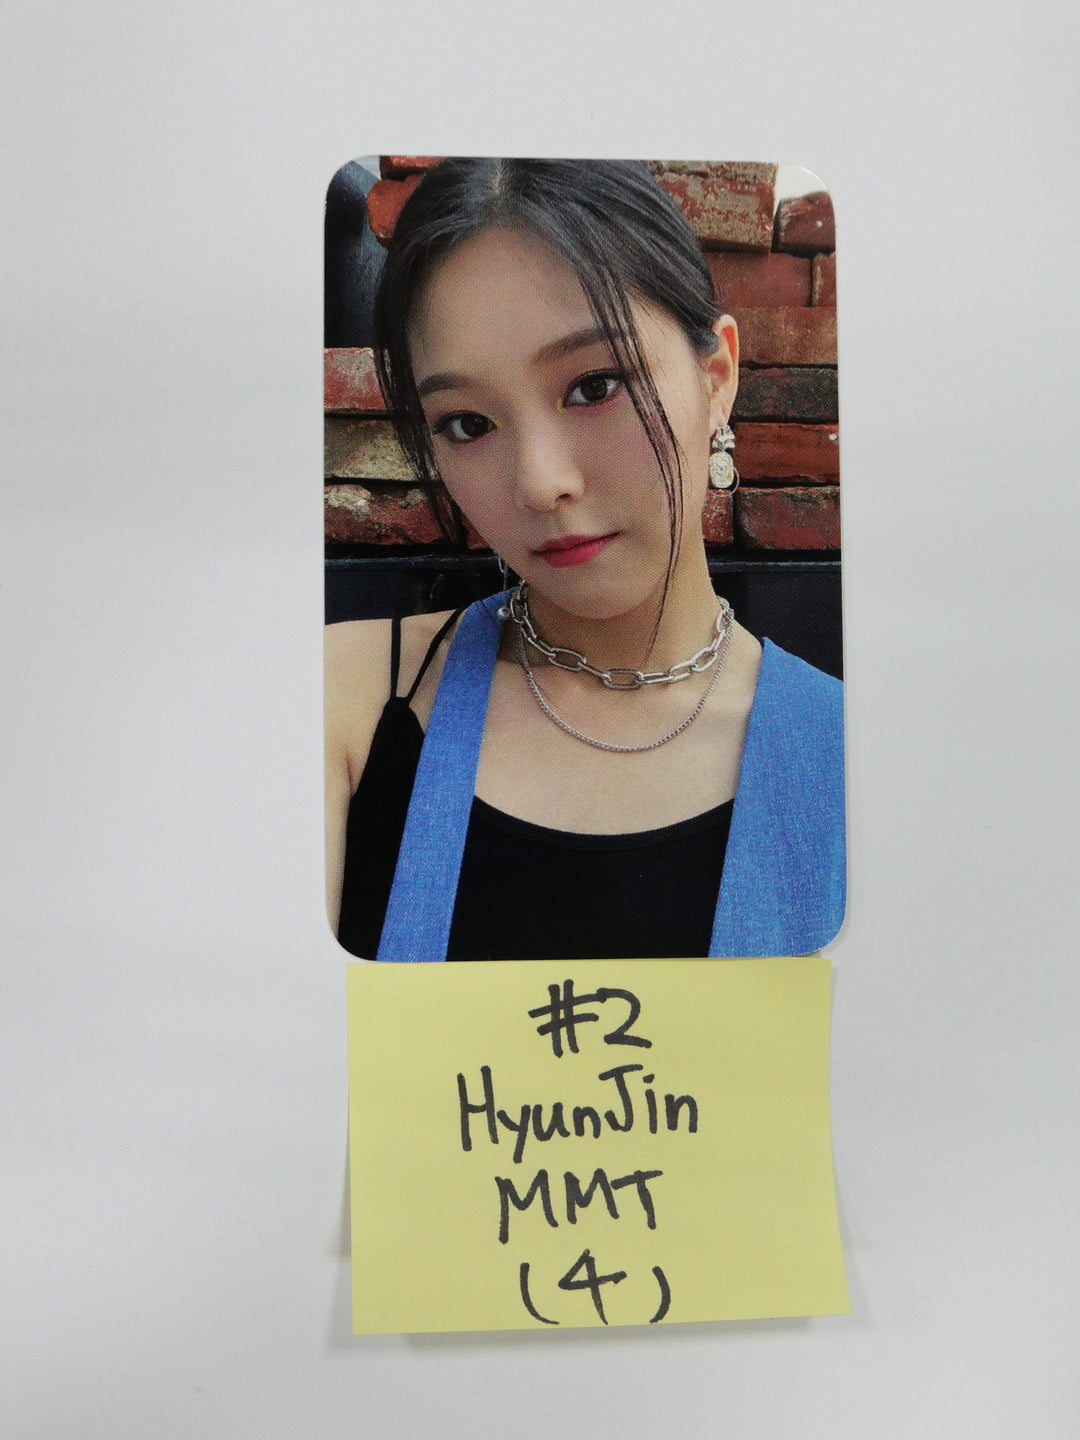 Loona '&' - MMT Fan Sign Event Photocard